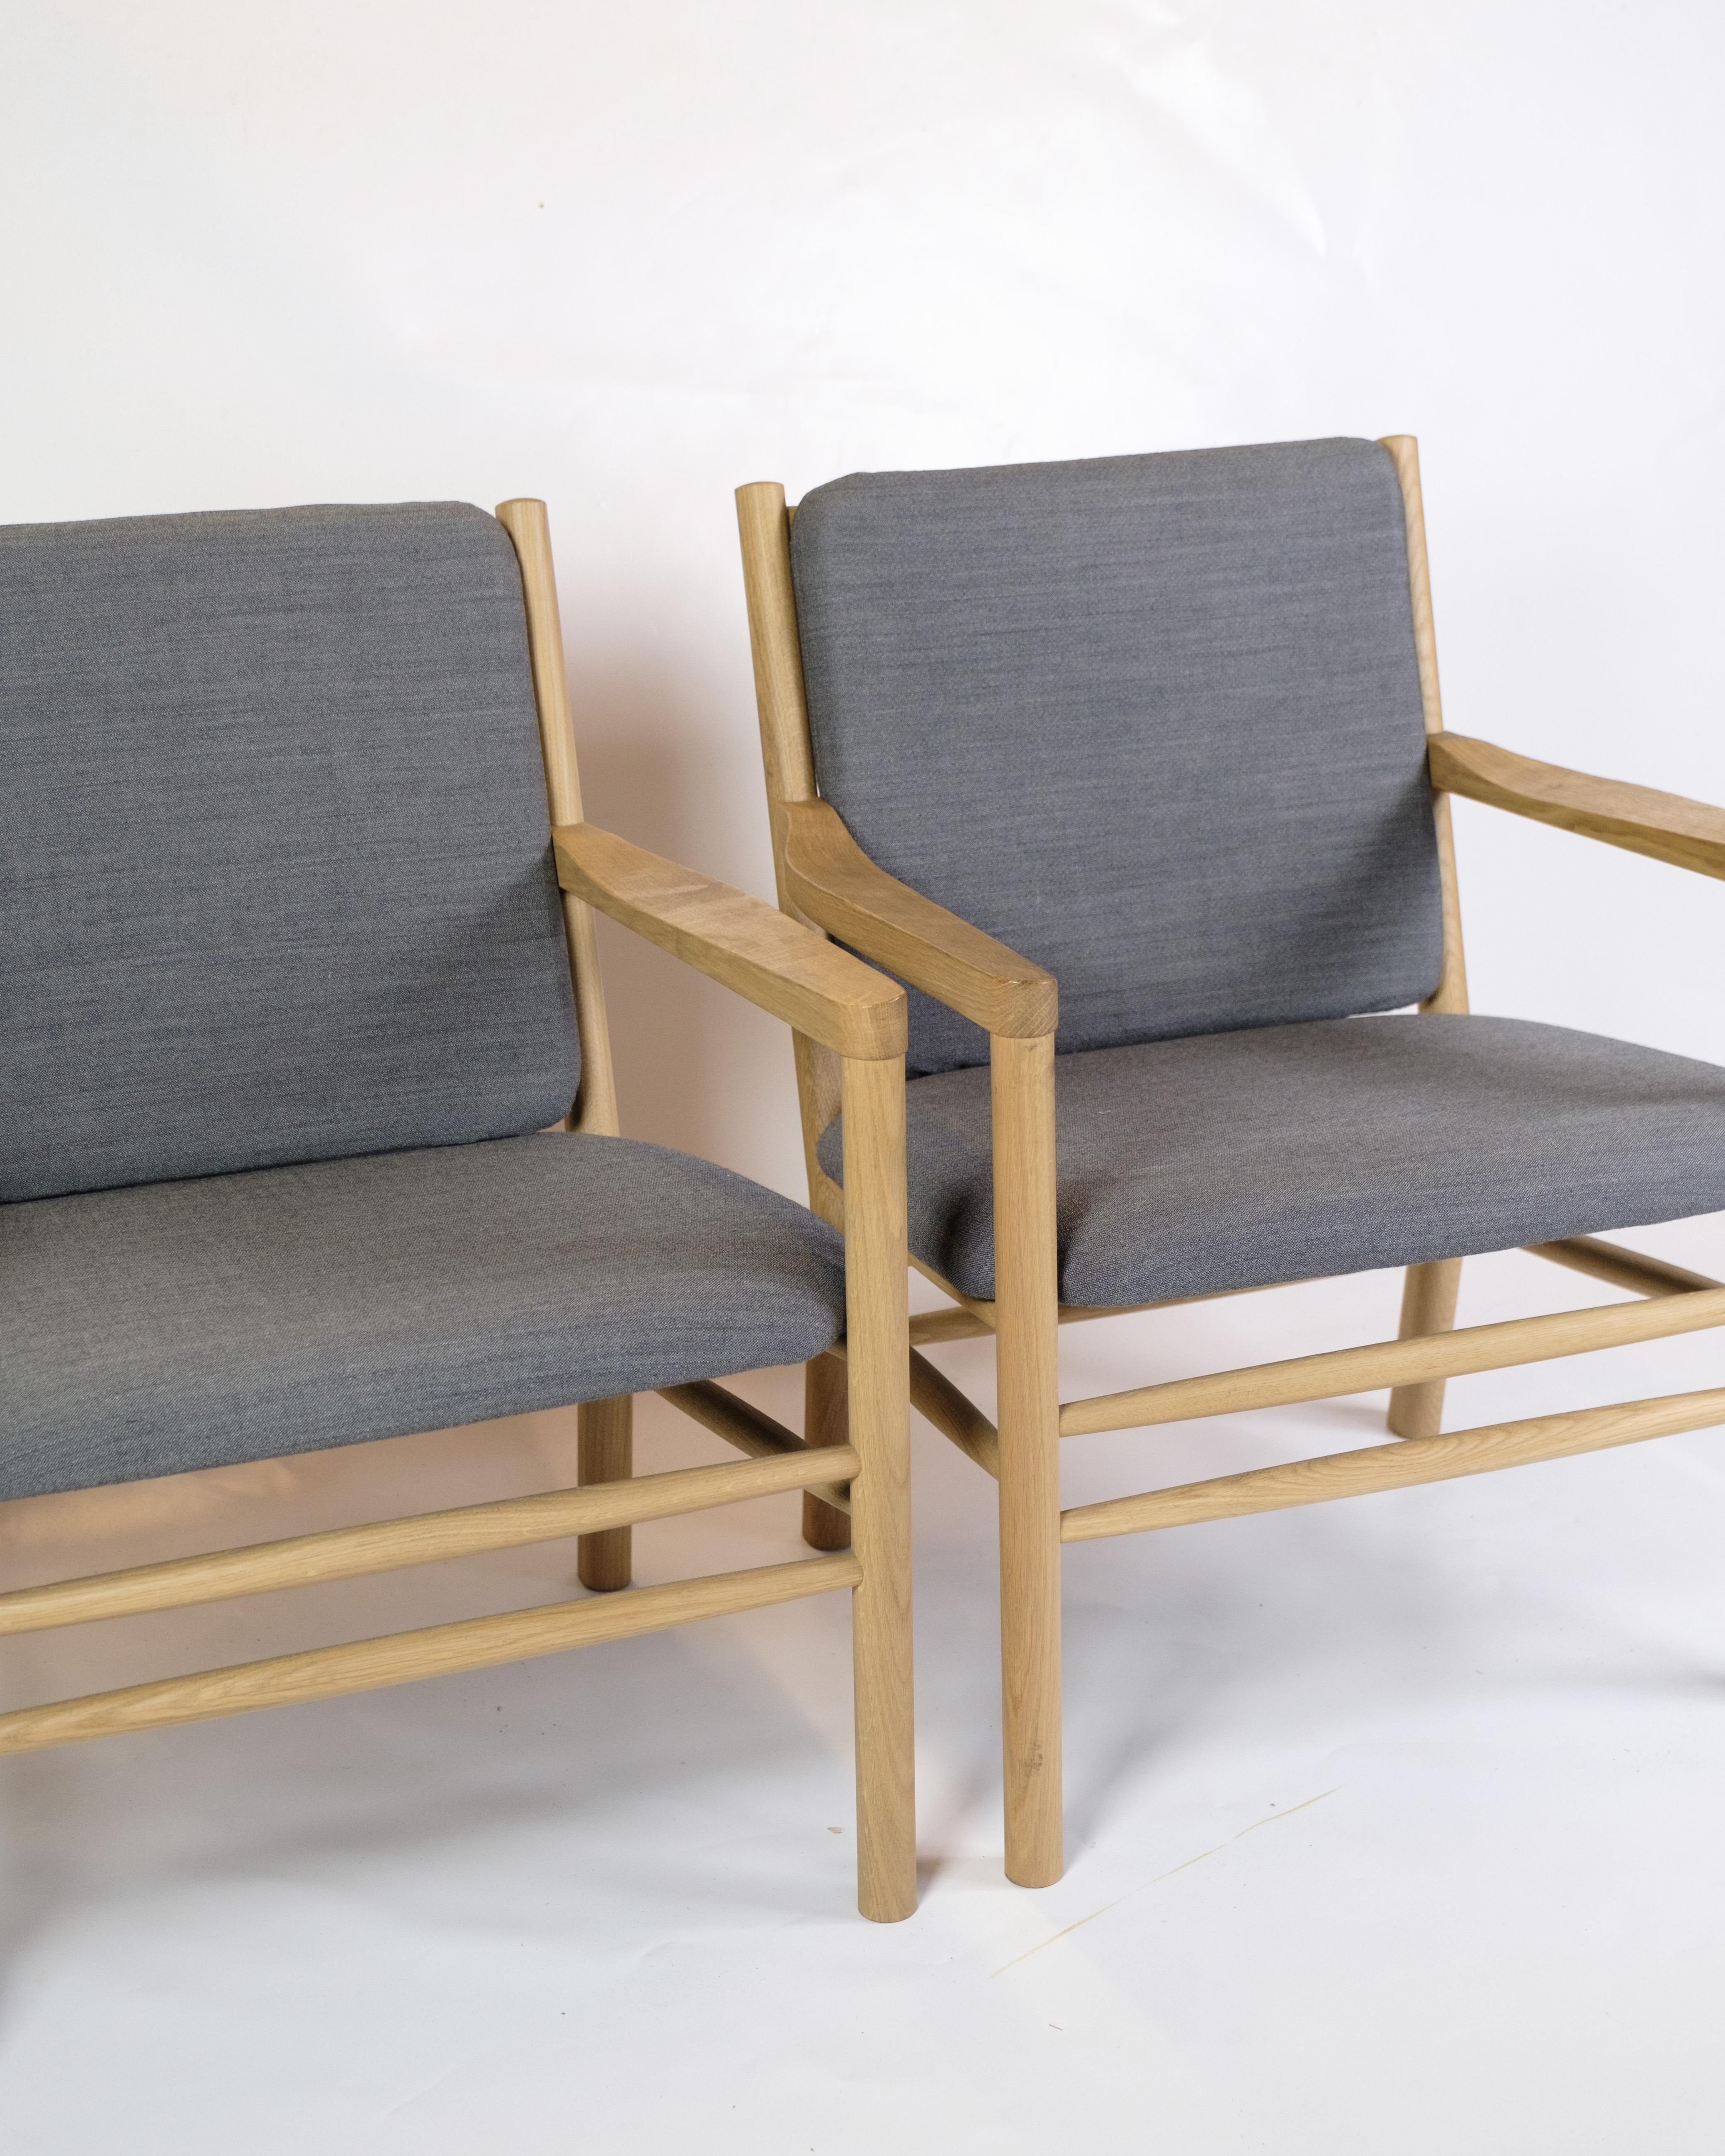 This set of two armchairs, model J147, exudes a sublime combination of comfort and elegance. Made from solid oak and upholstered in a stylish gray wool cover, these armchairs offer a luxurious seating experience.

Erik Ole Jørgensen, a renowned